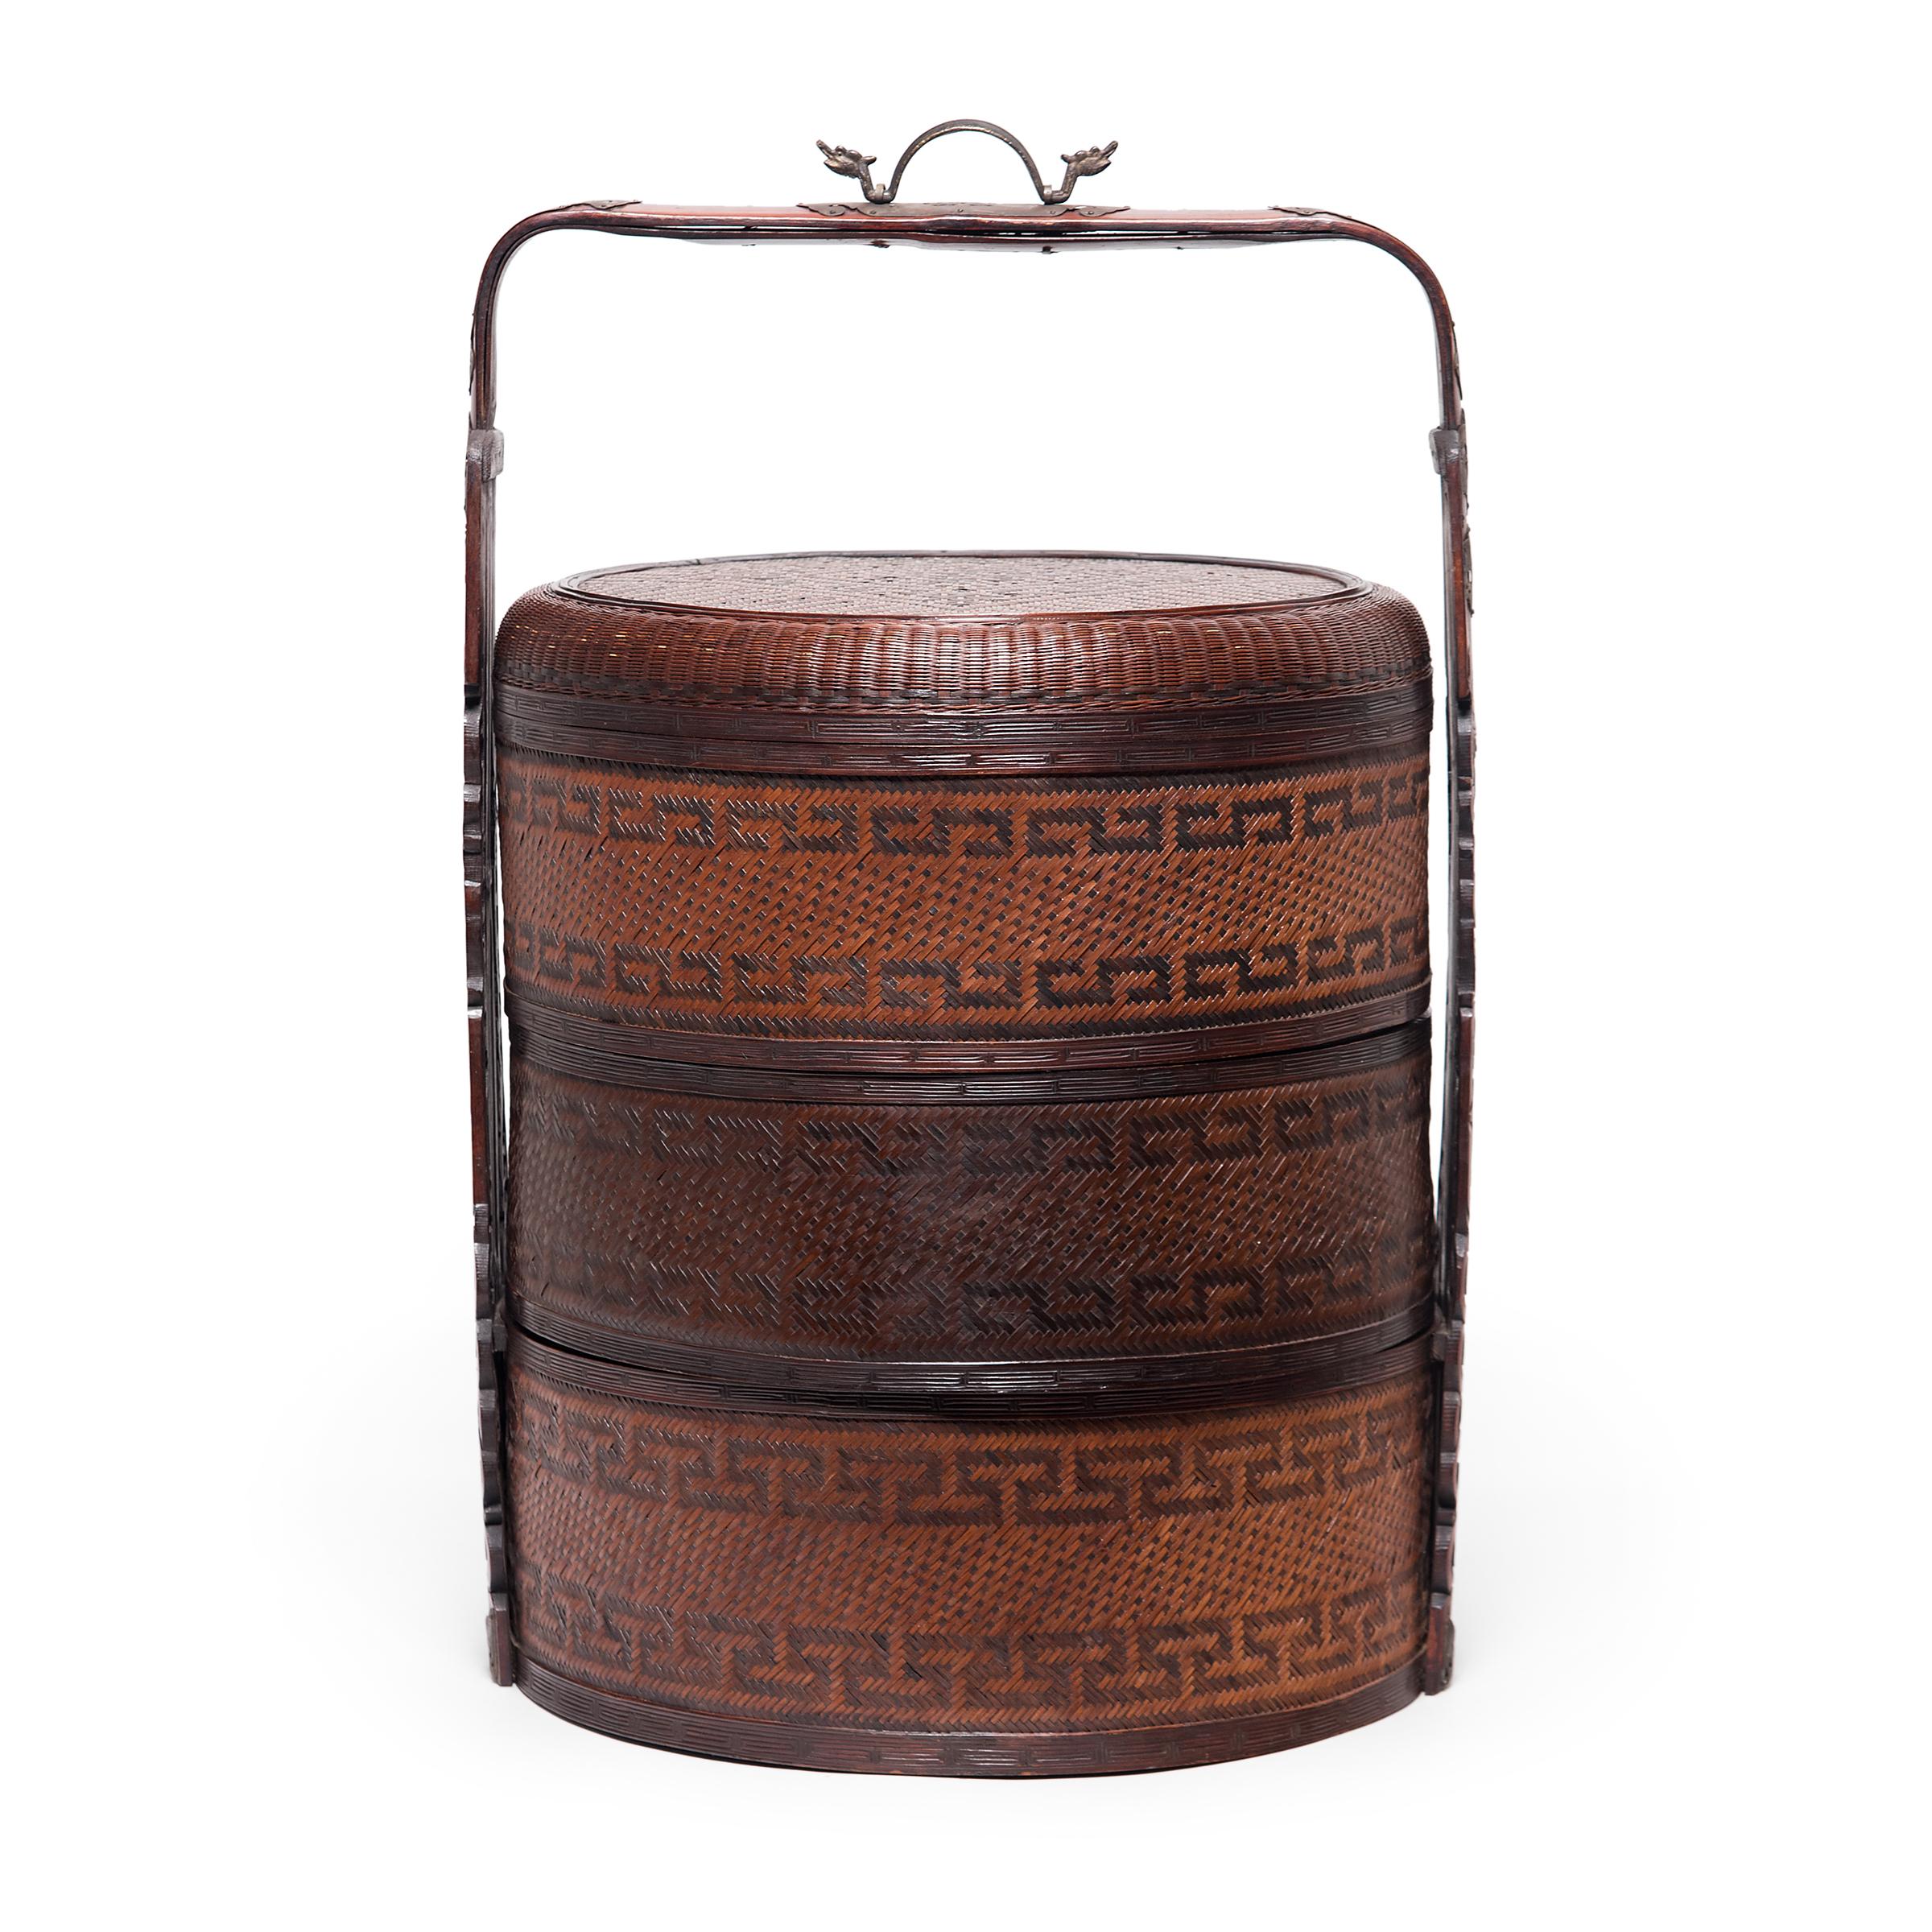 The basic form of this three-tiered Chinese box has remained unchanged for a thousand years. Used like a modern lunchbox, each tier of this portable stacking box would have been filled with food and carried around by the handle. With an elaborate